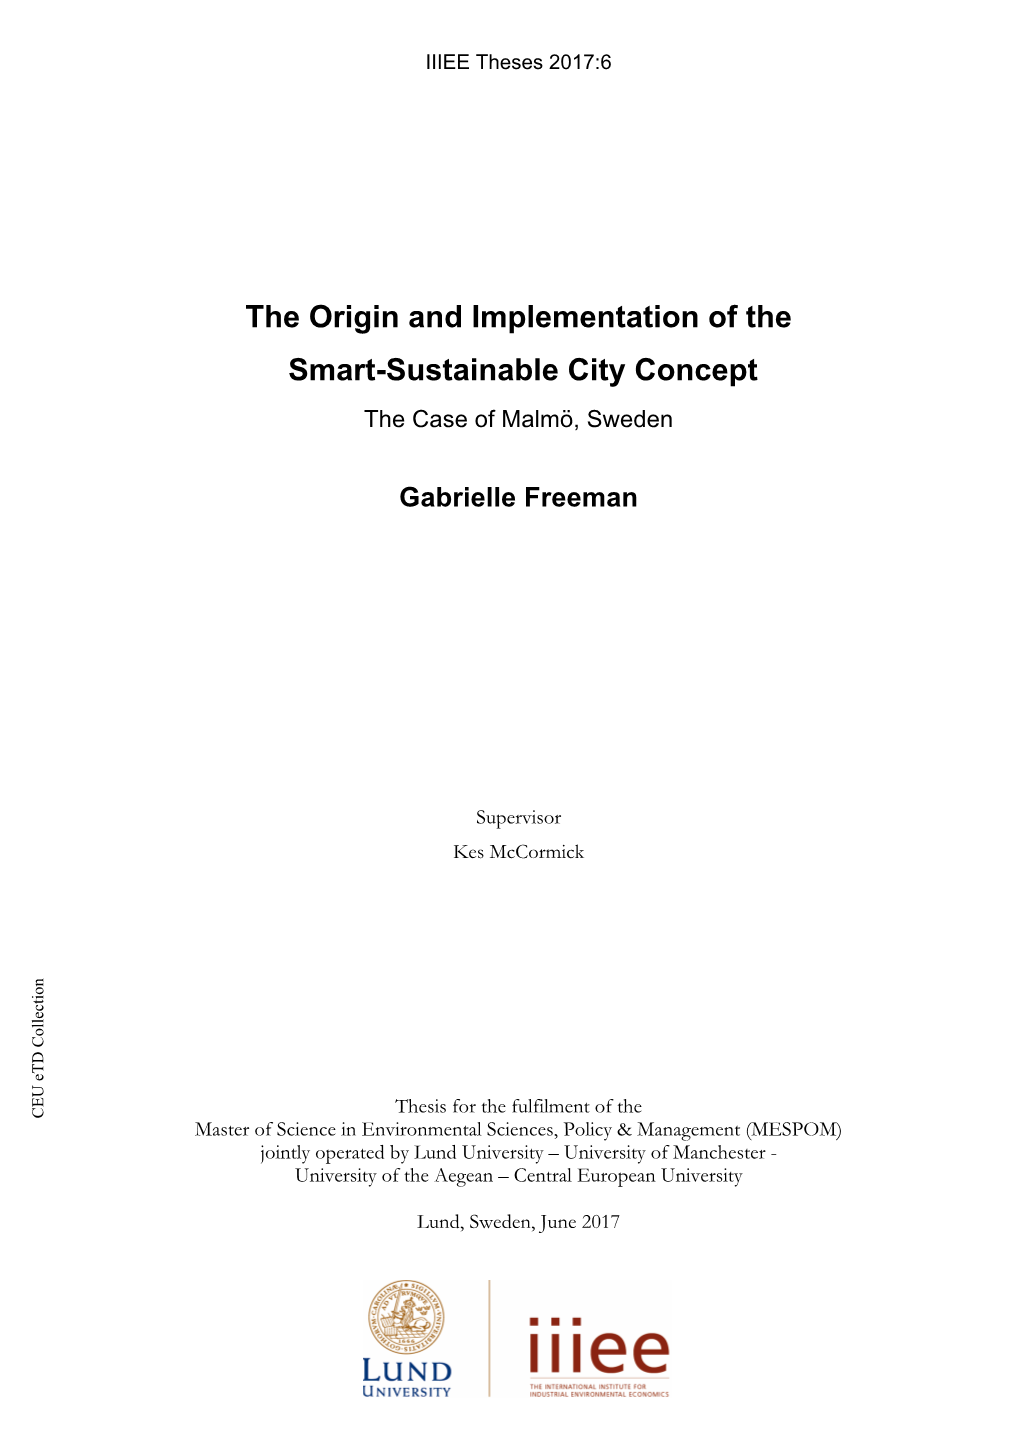 The Origin and Implementation of the Smart-Sustainable City Concept the Case of Malmö, Sweden